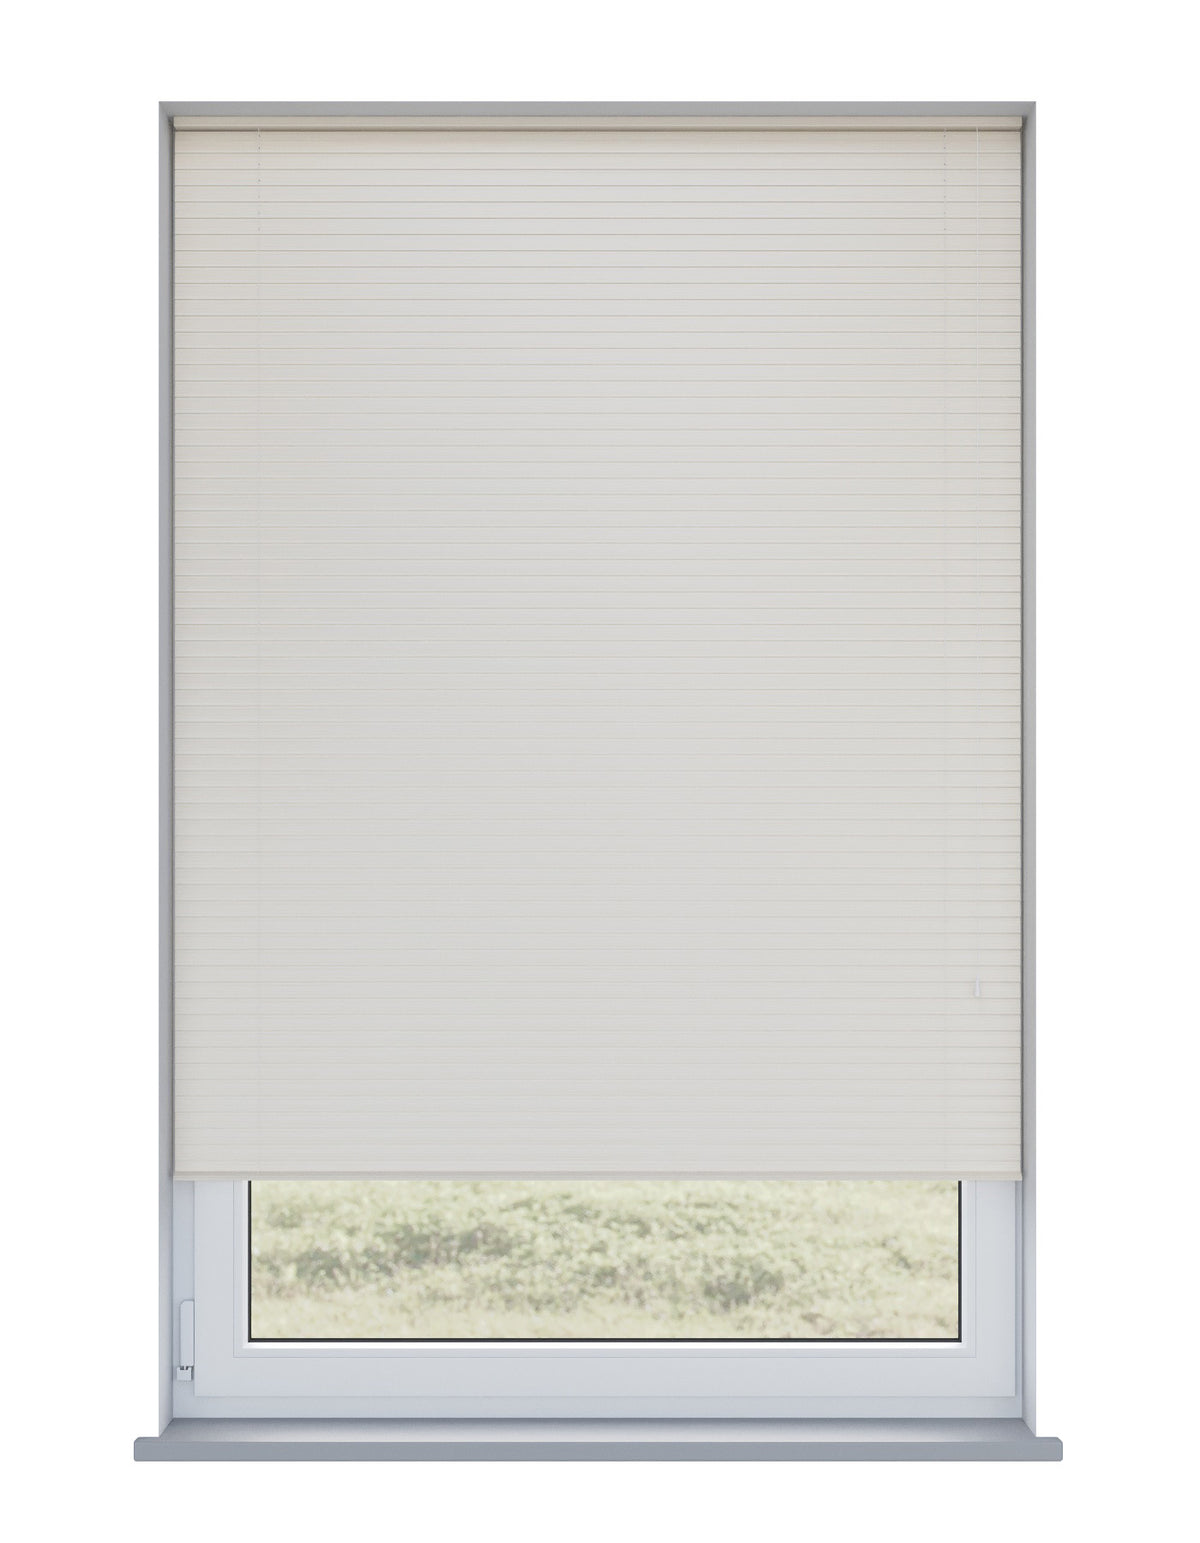 Expressions White Oak Wooden Blind